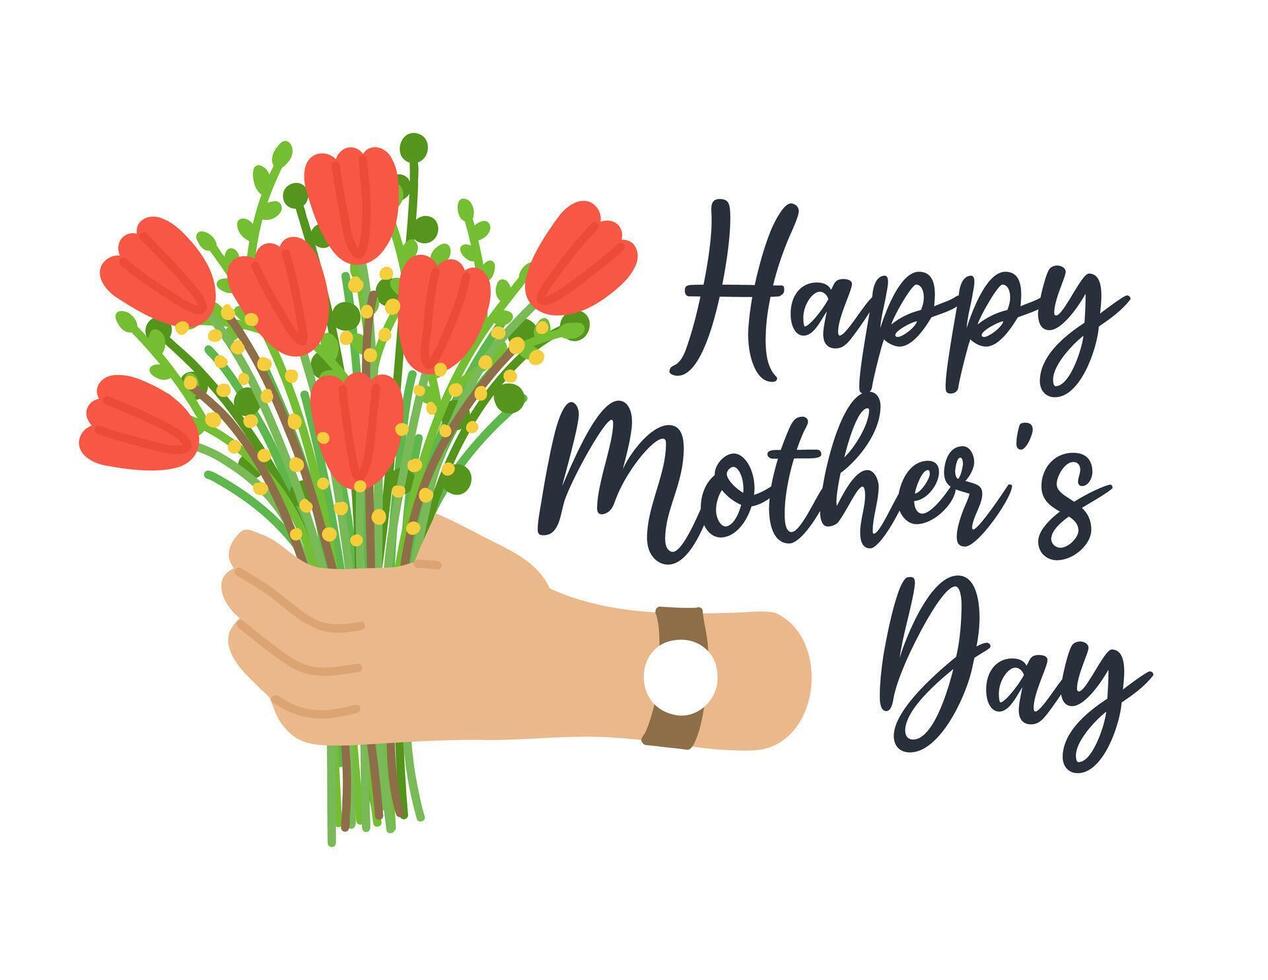 World Mother's Day Card with Bouquet of Flowers. Hand holding red tulips. Hand drawn flat cartoon element on white background. Vector illustration